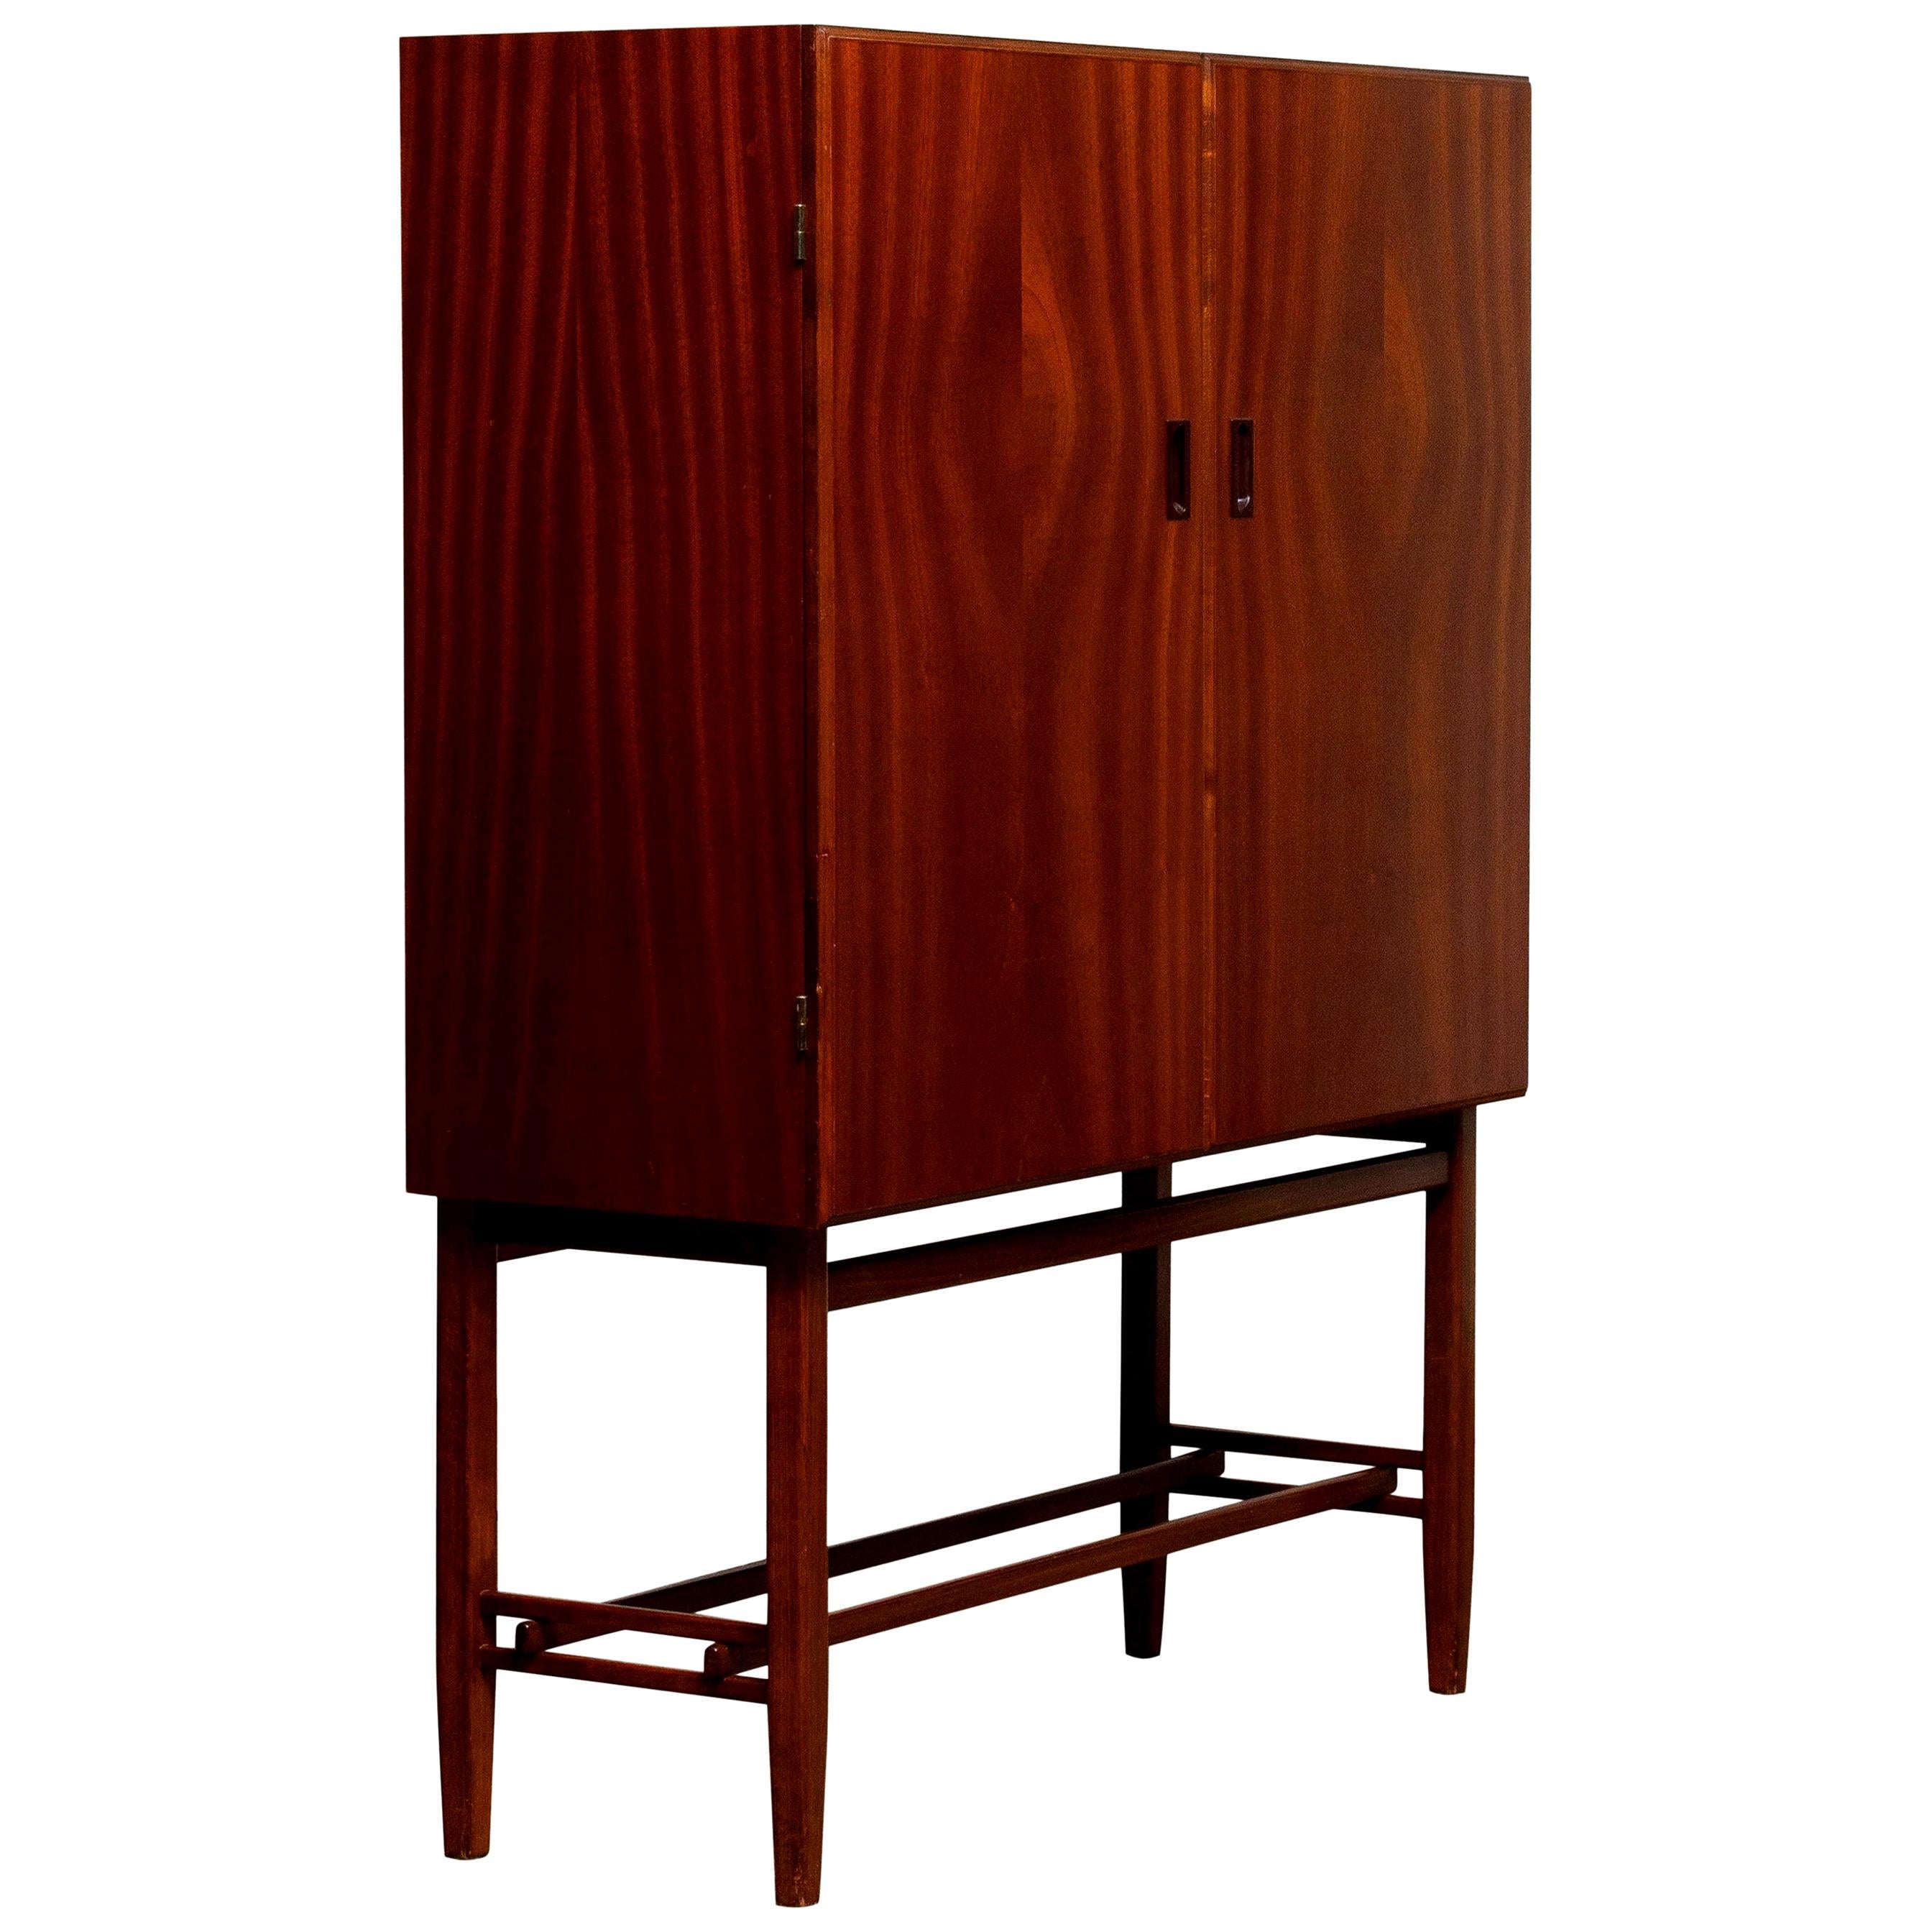 Beautiful dry bar or cabinet in mahogany made in Sweden, by Forenades Mobler of Linkoping, 1950s.
Equipped with two doors with behind two drawers and two adjustable shelves.
Standing on slim and tall legs.

The overall condition is very good.